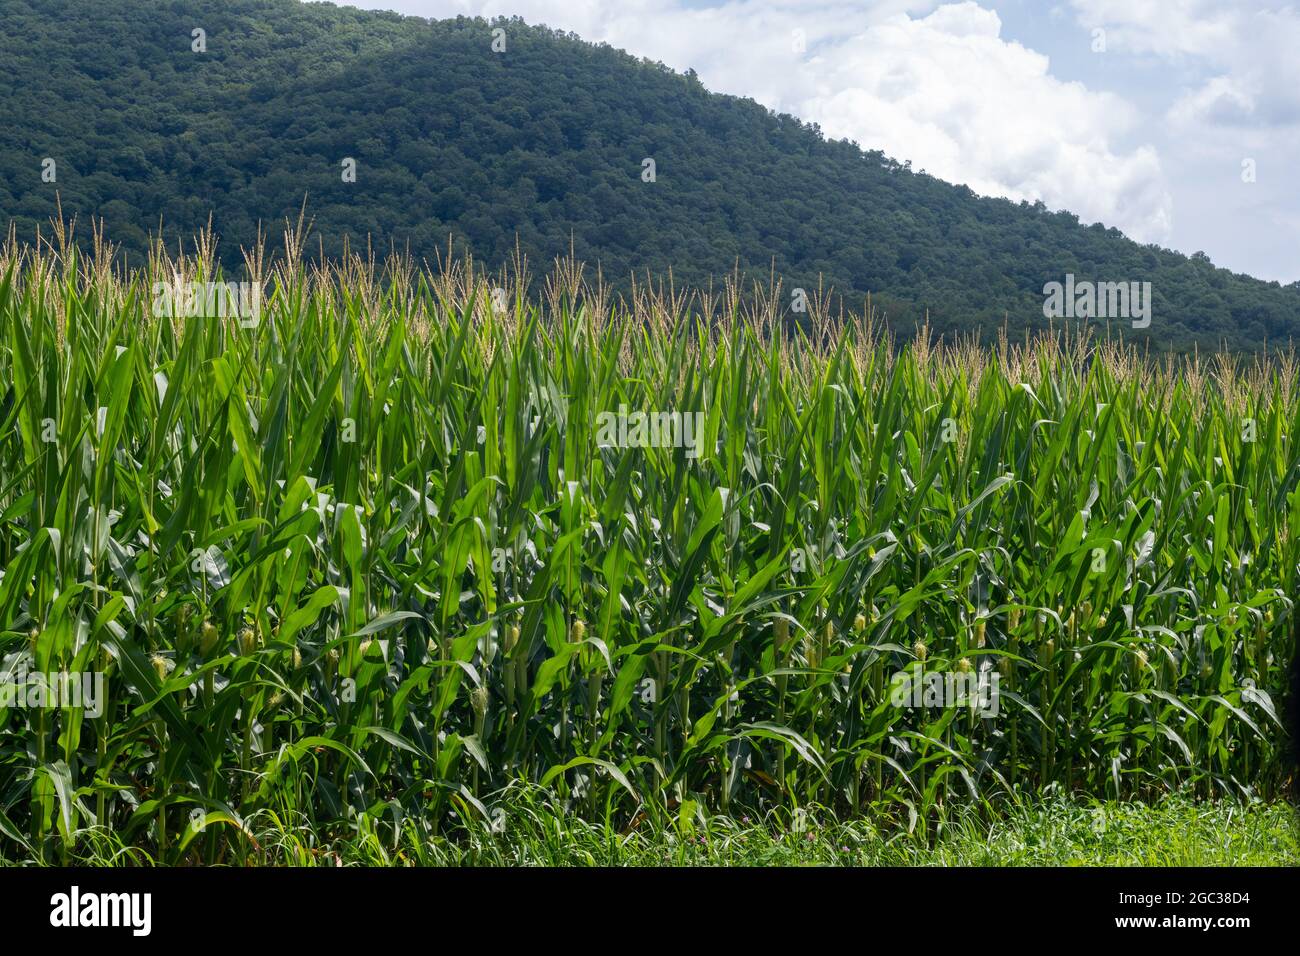 Corn growing in a farm field with a mountain range in the background Stock Photo